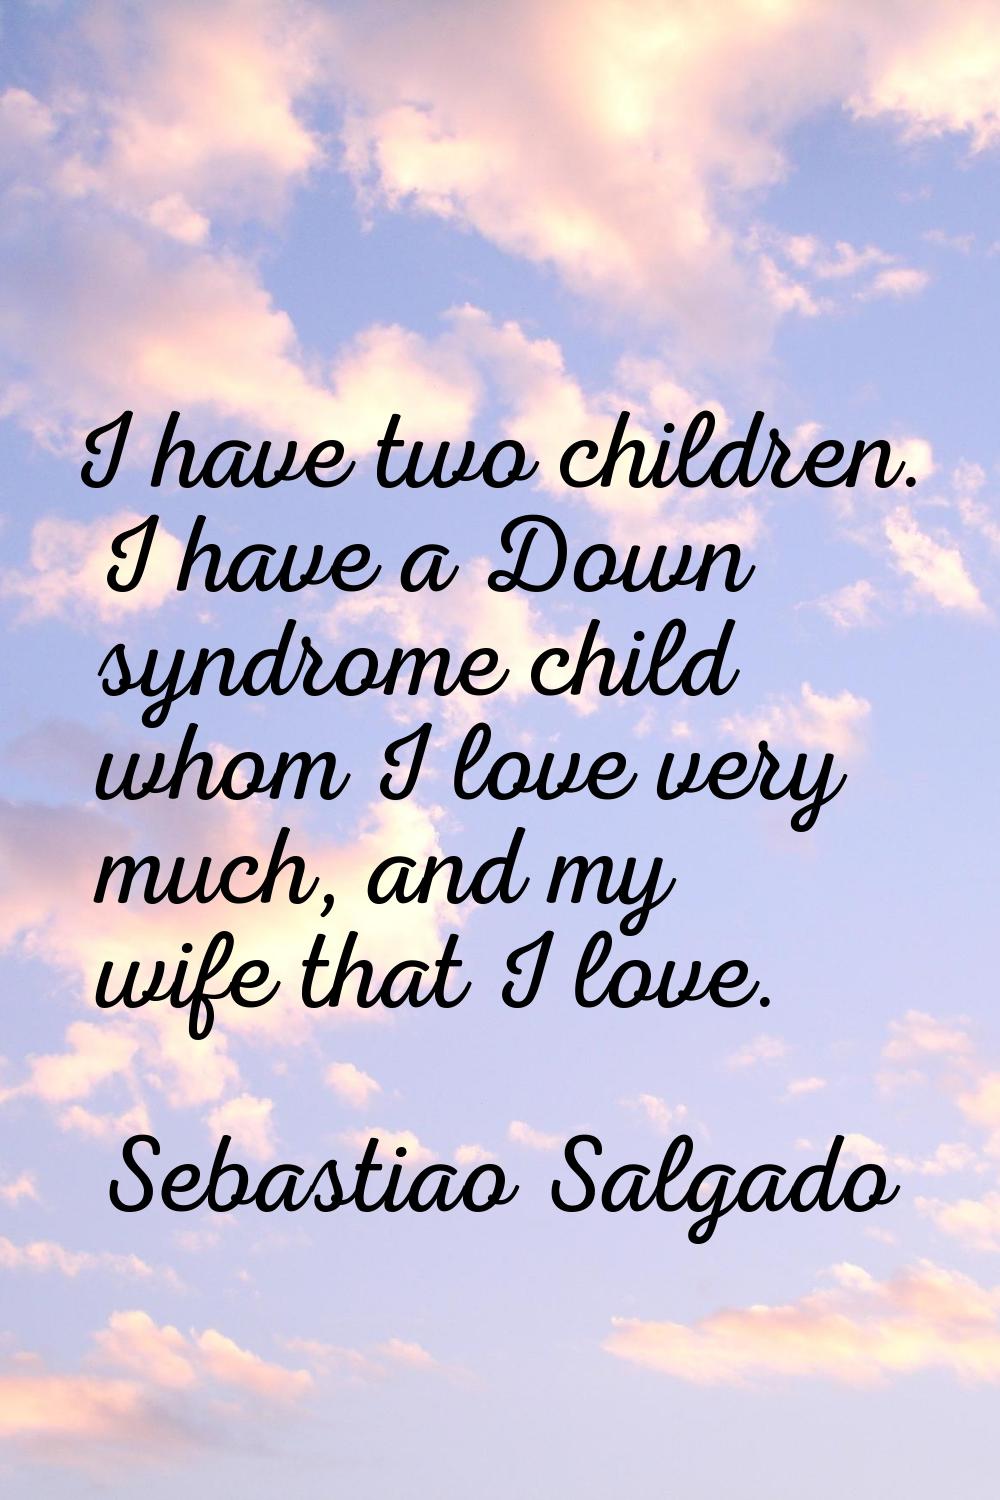 I have two children. I have a Down syndrome child whom I love very much, and my wife that I love.